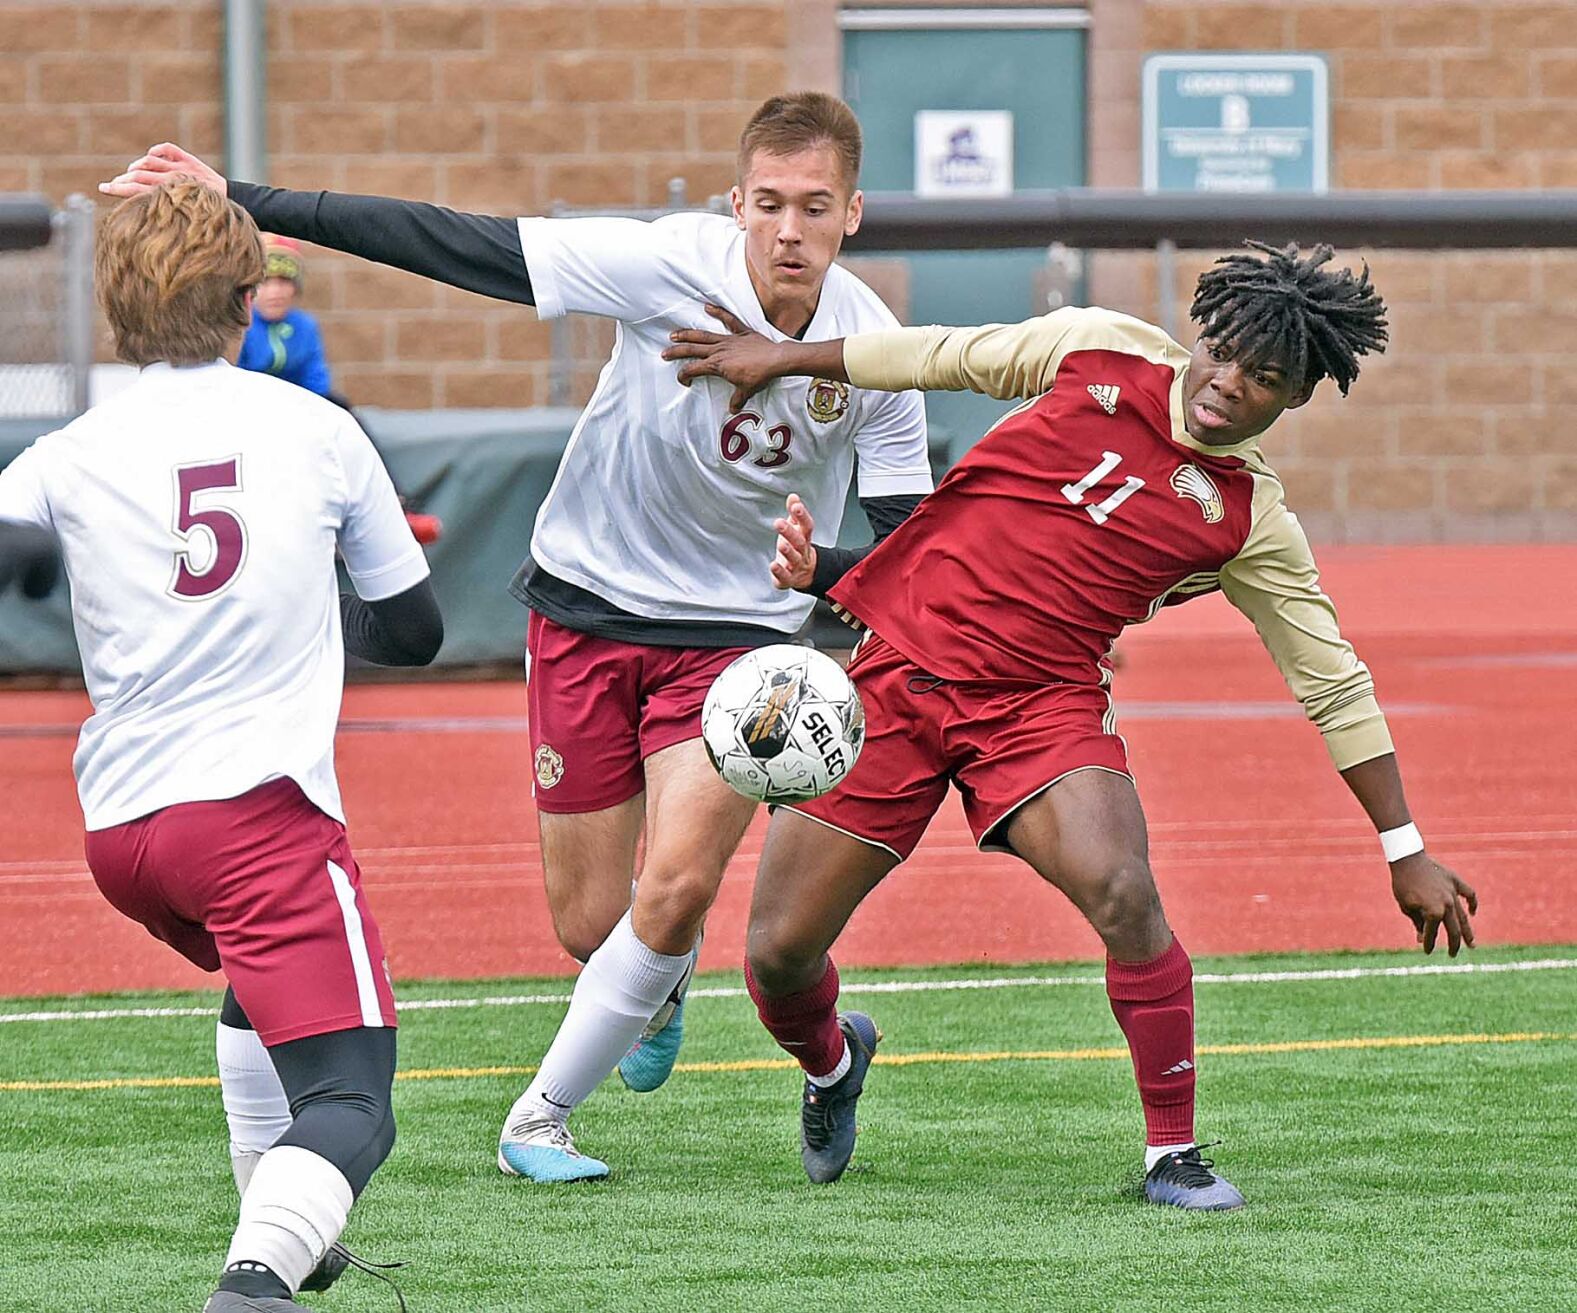 Brayden Oswalt leads Minot Magicians to 3-1 victory over Fargo Davies in state boys soccer semifinals